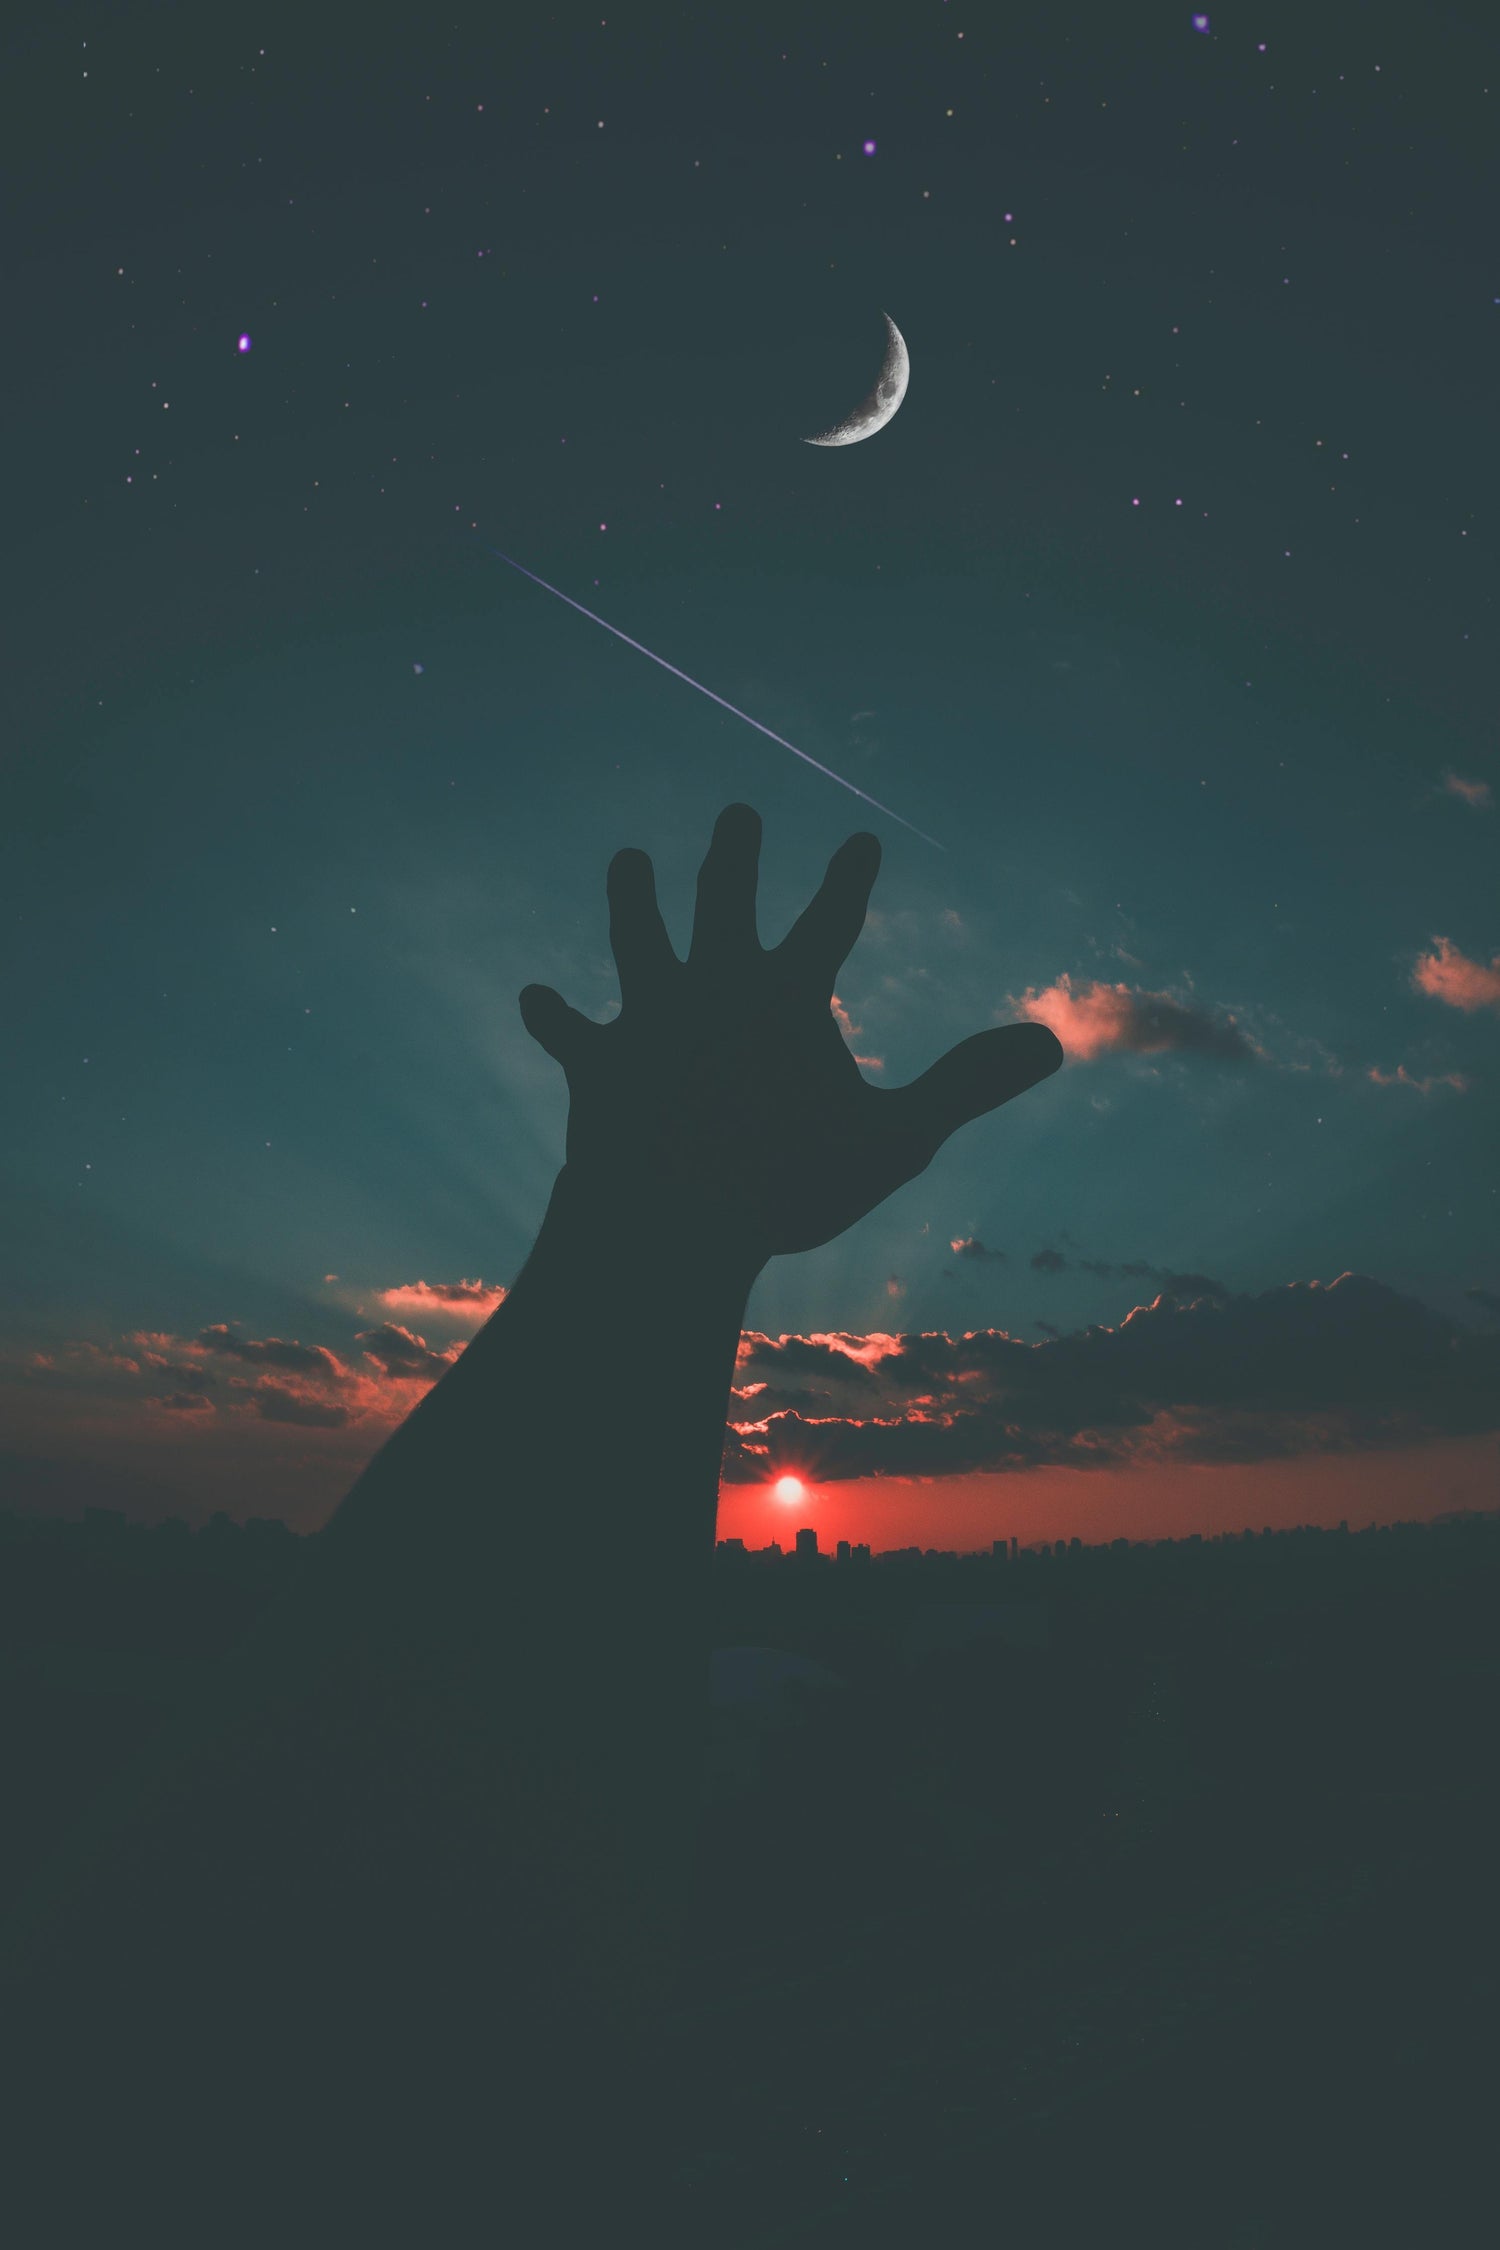 Creative image of a hand reaching out to the cosmos